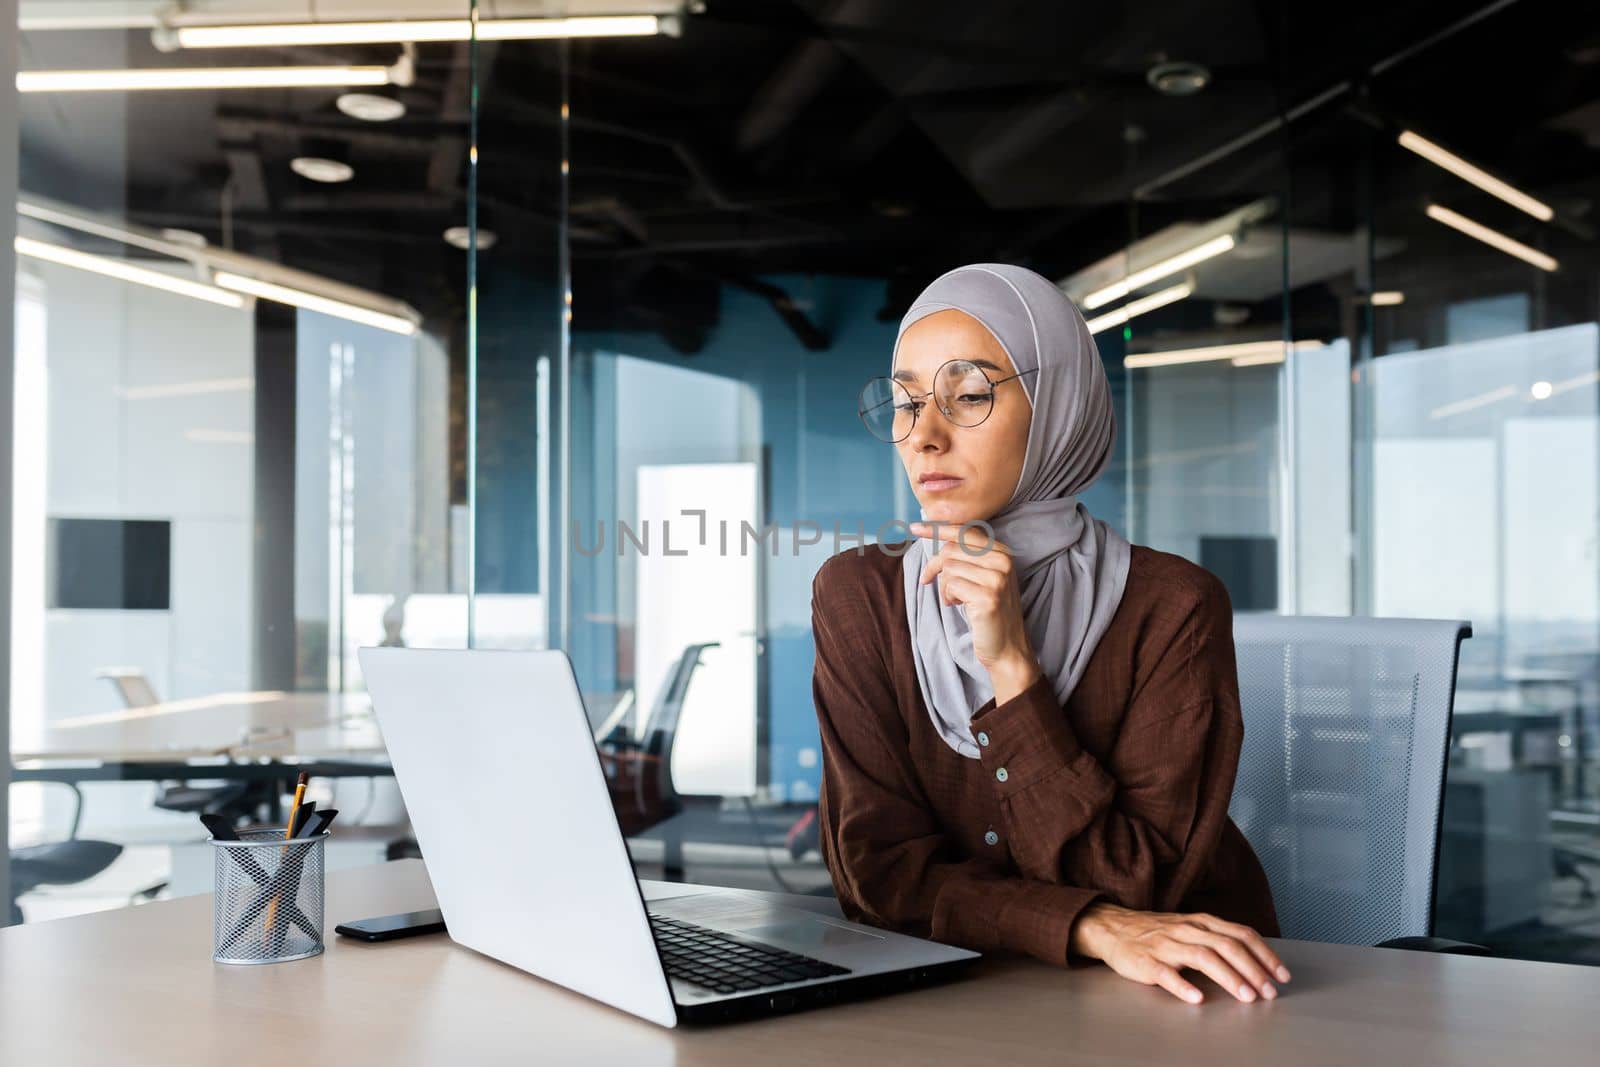 Serious bored businesswoman inside office, muslim woman in hijab thinking while sitting at workplace with laptop, woman at work thinking about decisions by voronaman